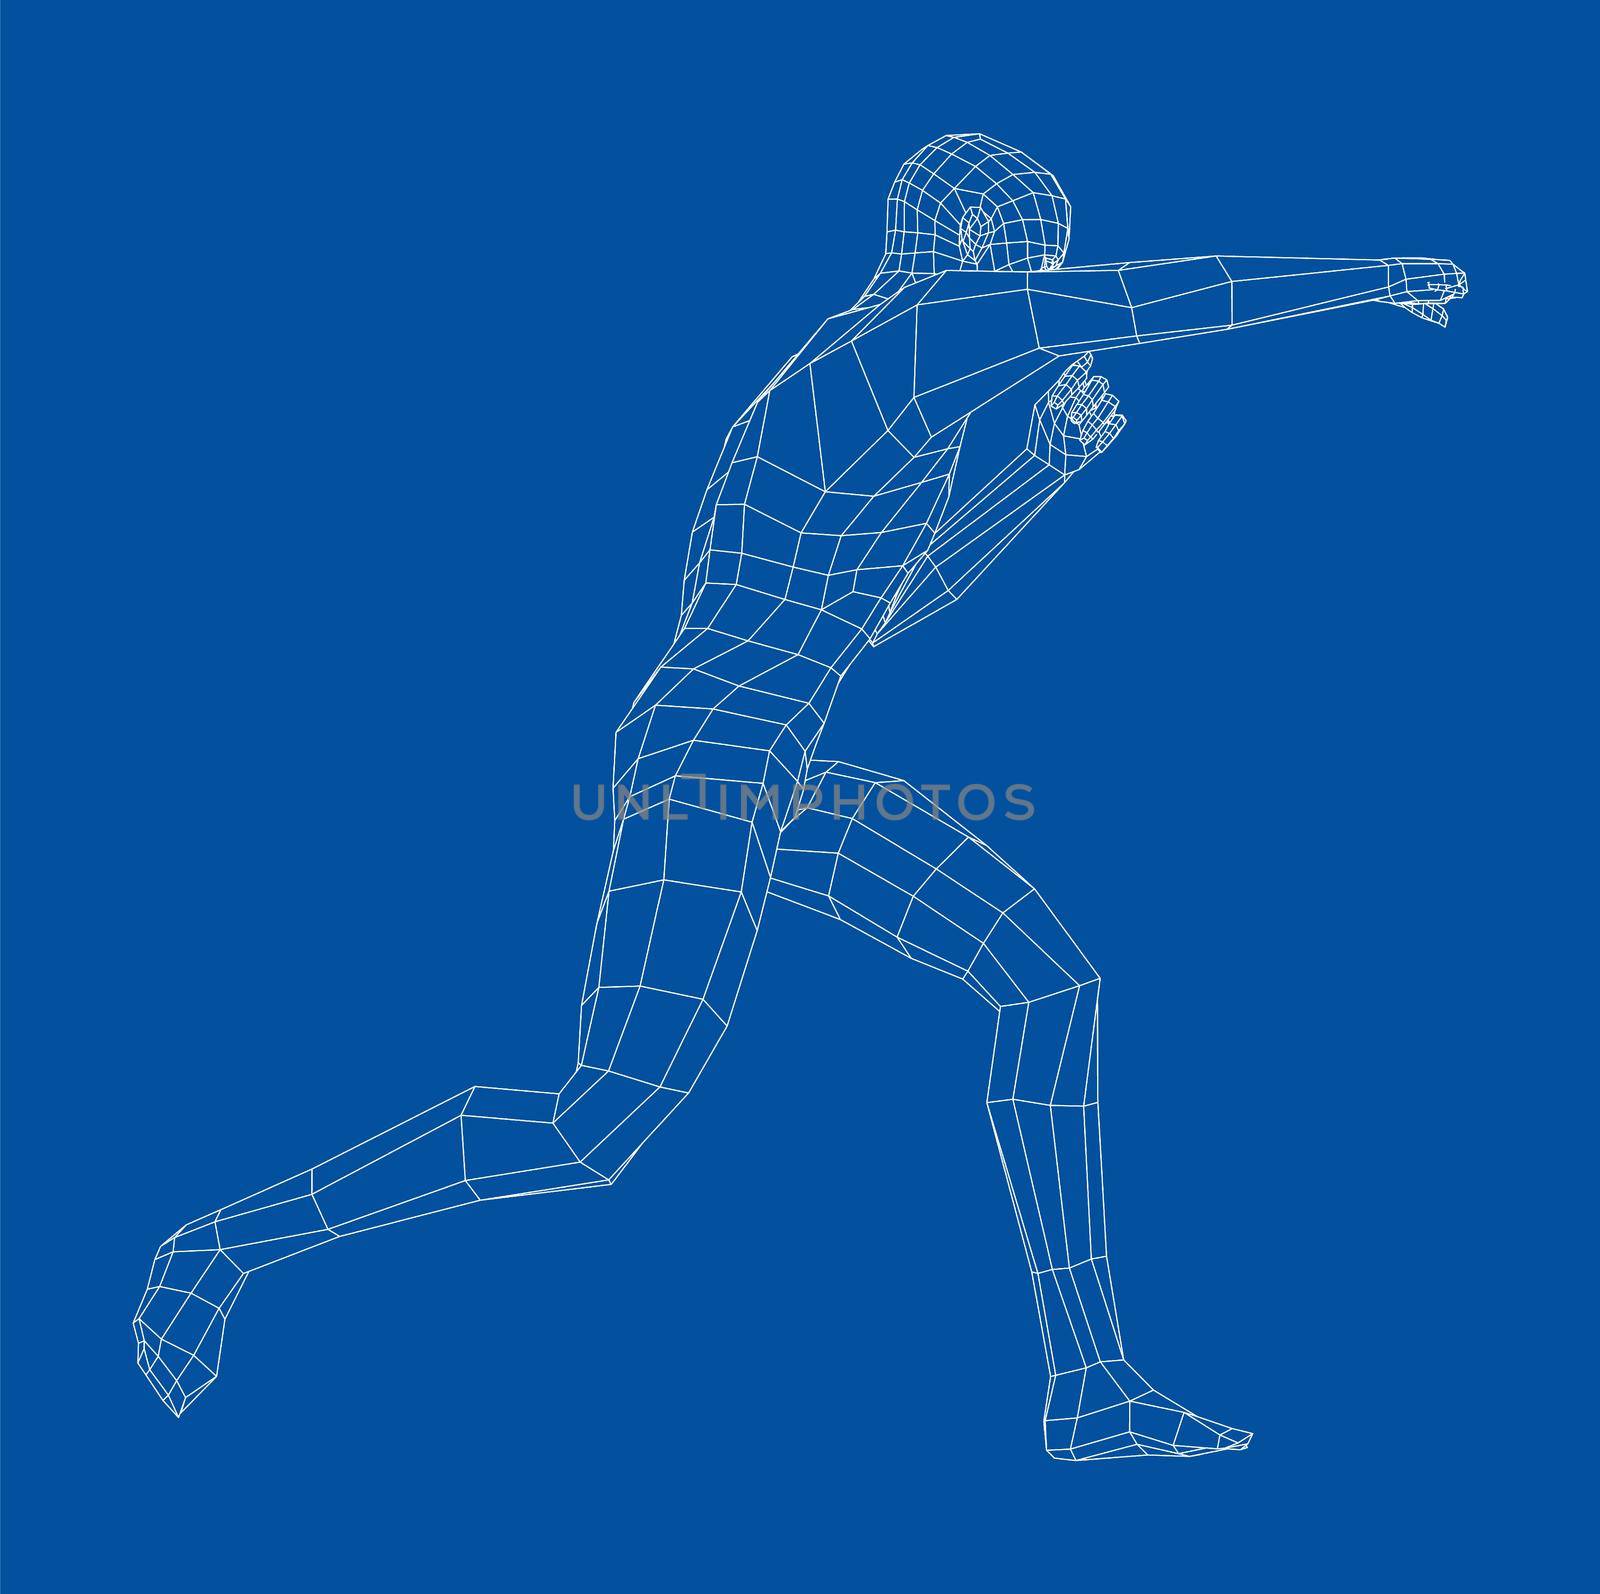 Wireframe boxing man. 3d illustration. Man in boxing pose